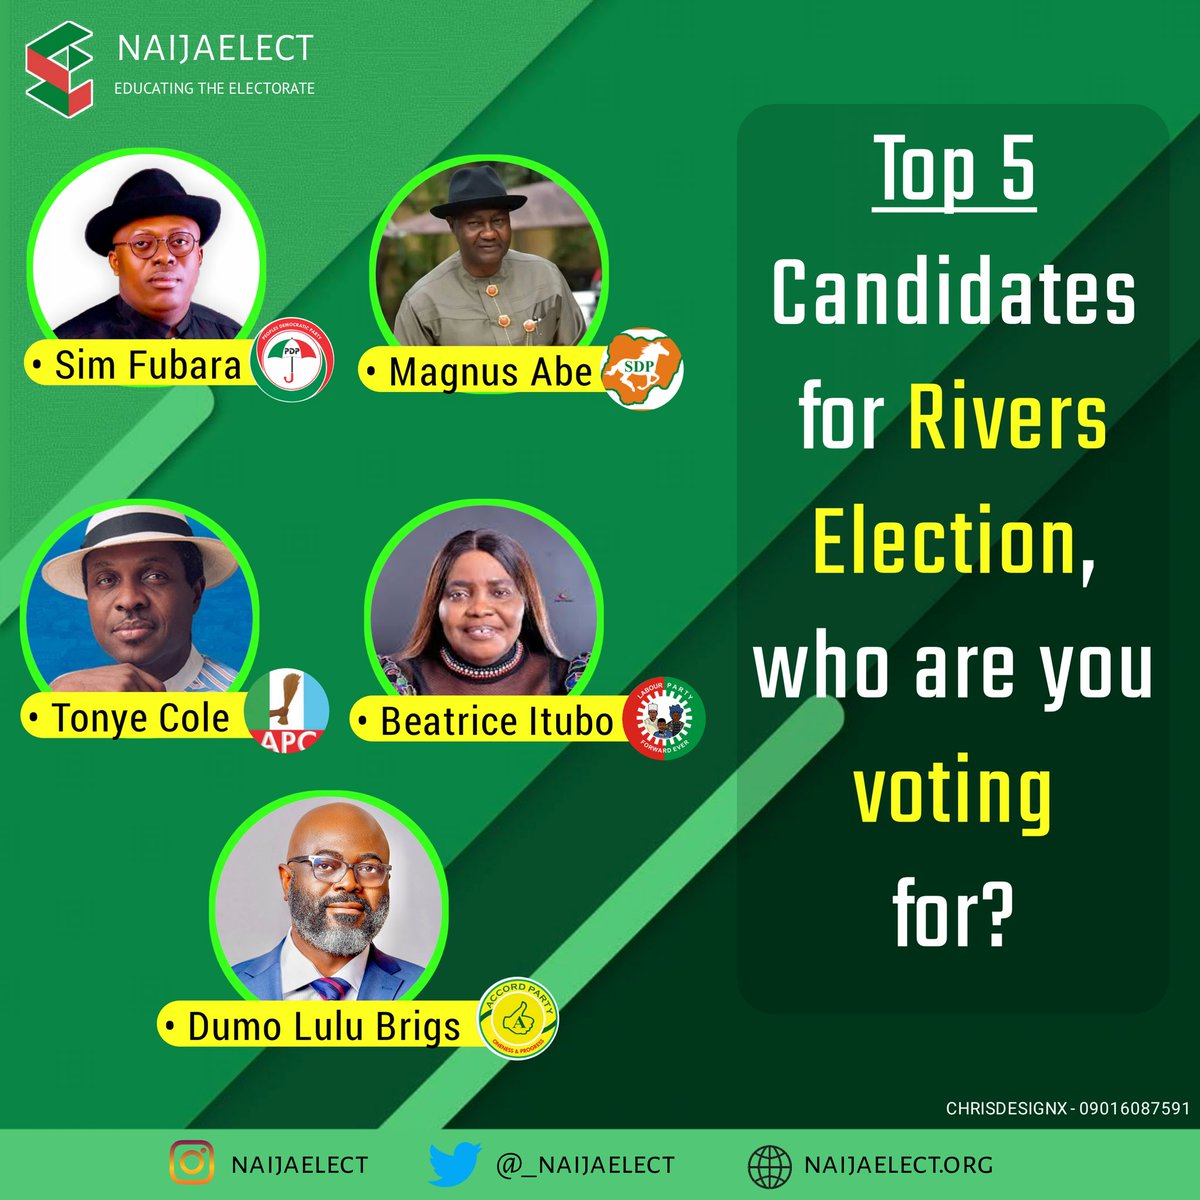 Top 5 candidates for Rivers State Election, who are you voting for?
..
DON'T SELL YOUR VOTES

Let's Make History Together.💪
..
@inecnigeria

#nigeriapolitics #nigeria #GeneralElectionNow #politics #naijaelect #nigerianewstoday #LagosDecides2023 #inec